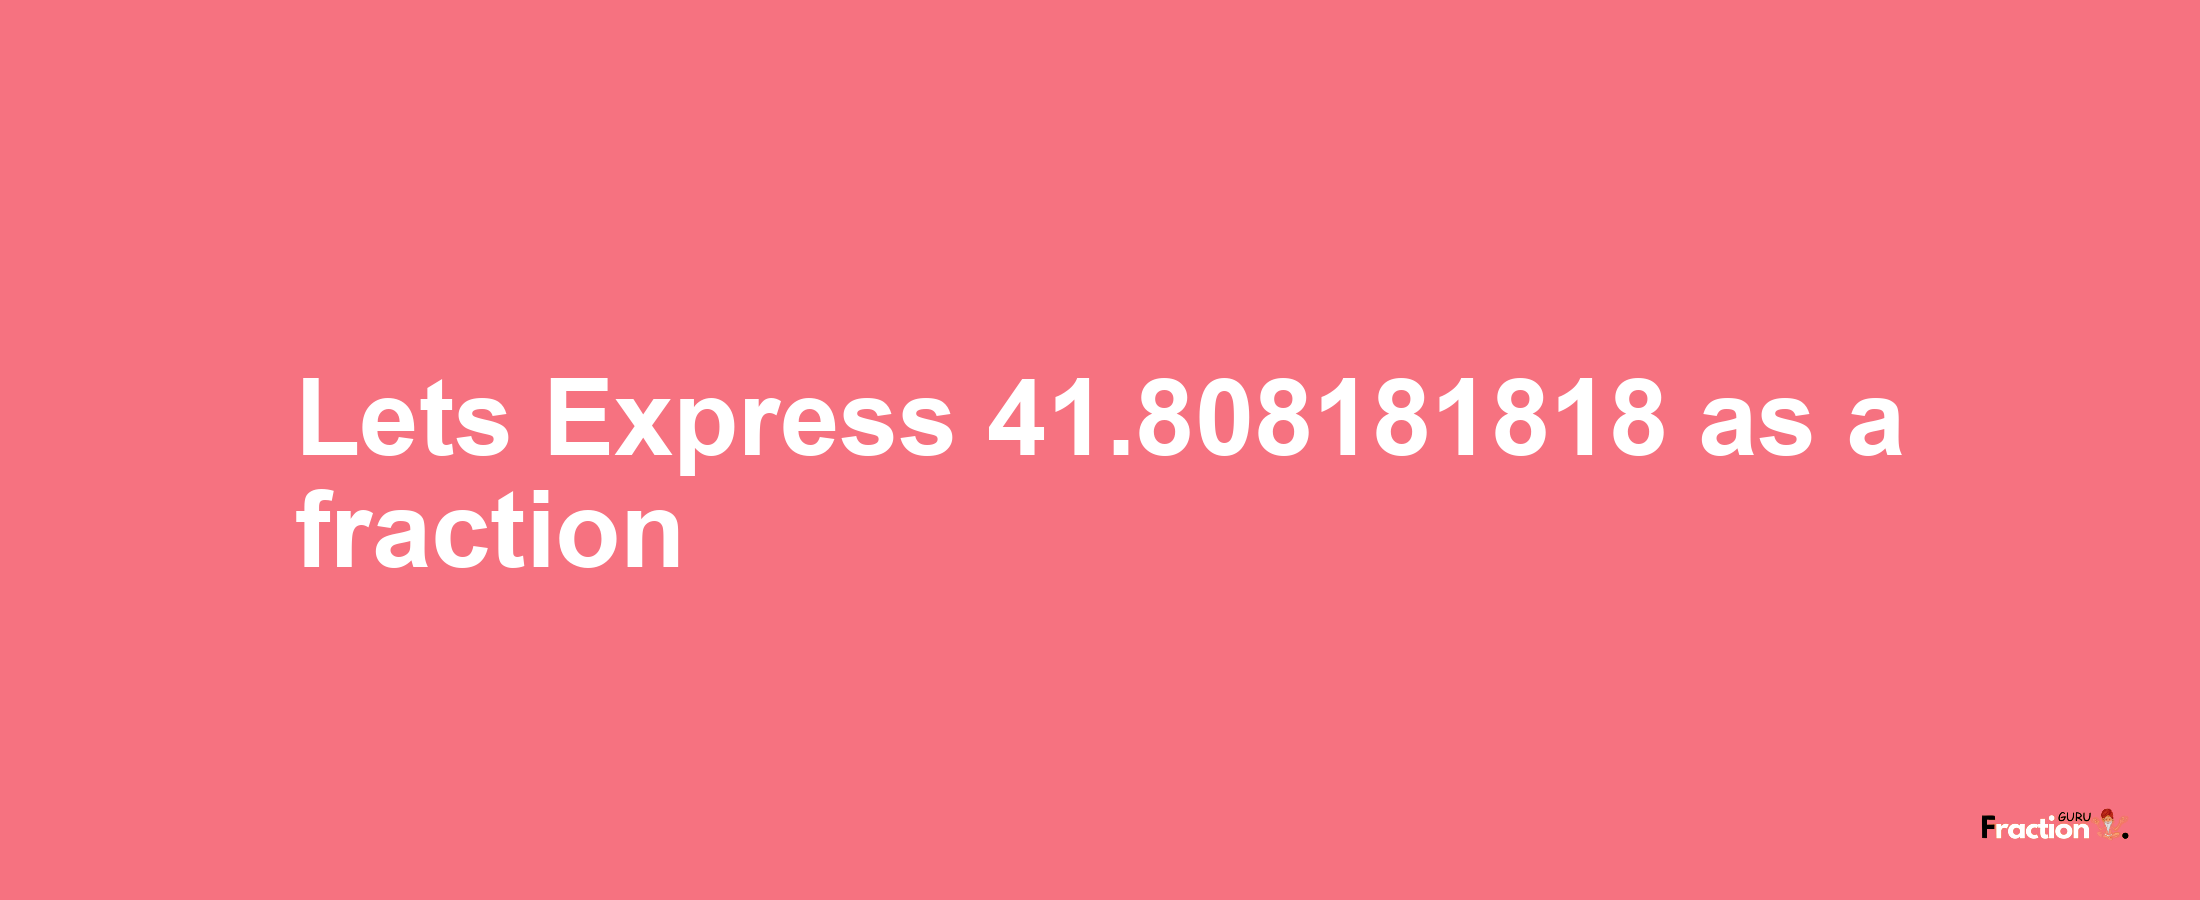 Lets Express 41.808181818 as afraction